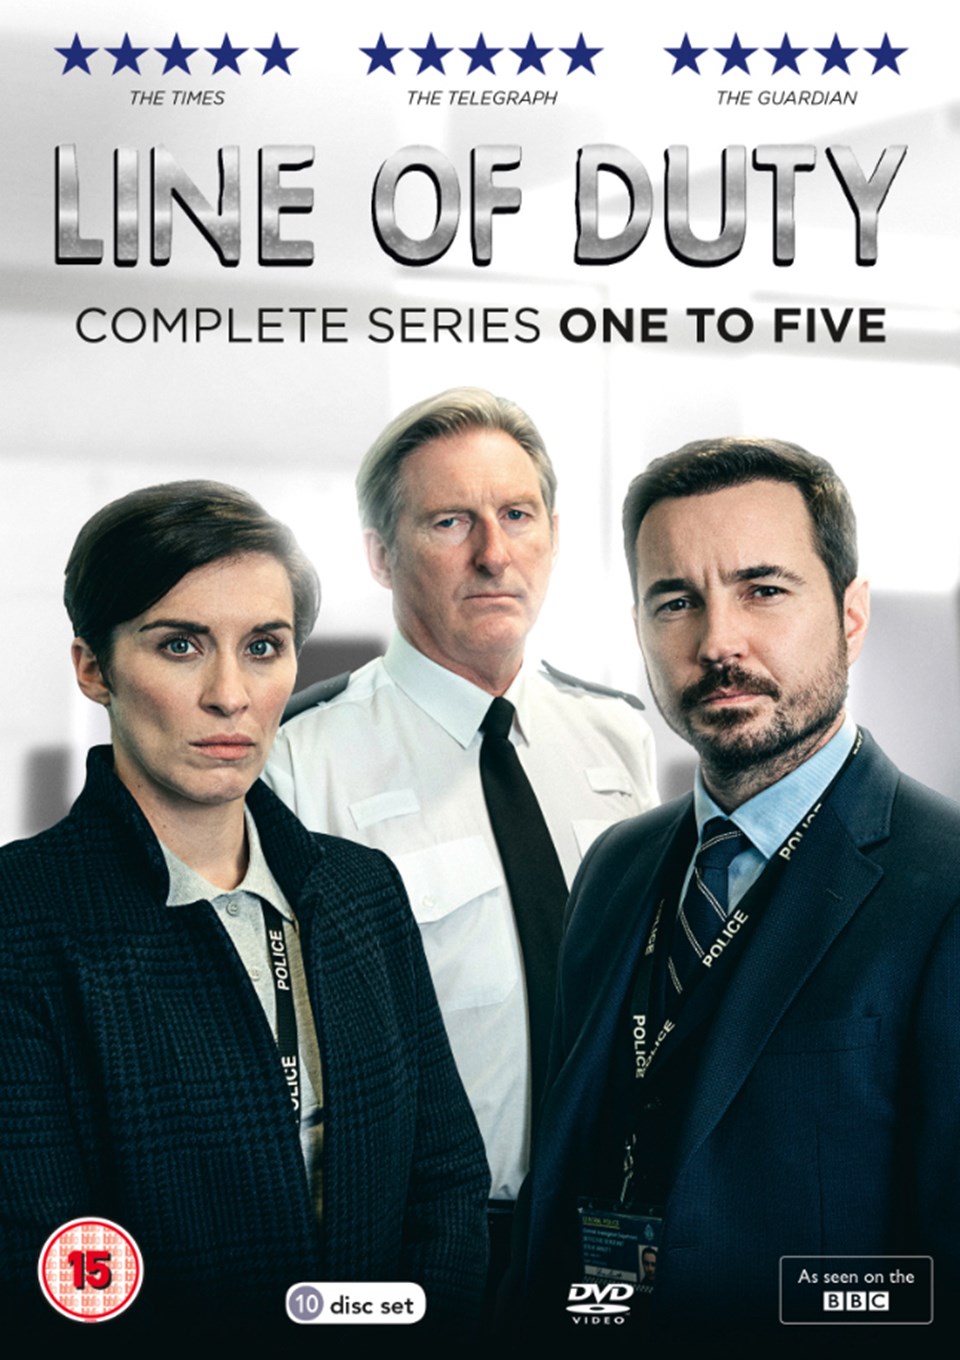 Line Of Duty Box Set Dvd Complete Season Series 1 5 Free Delivery